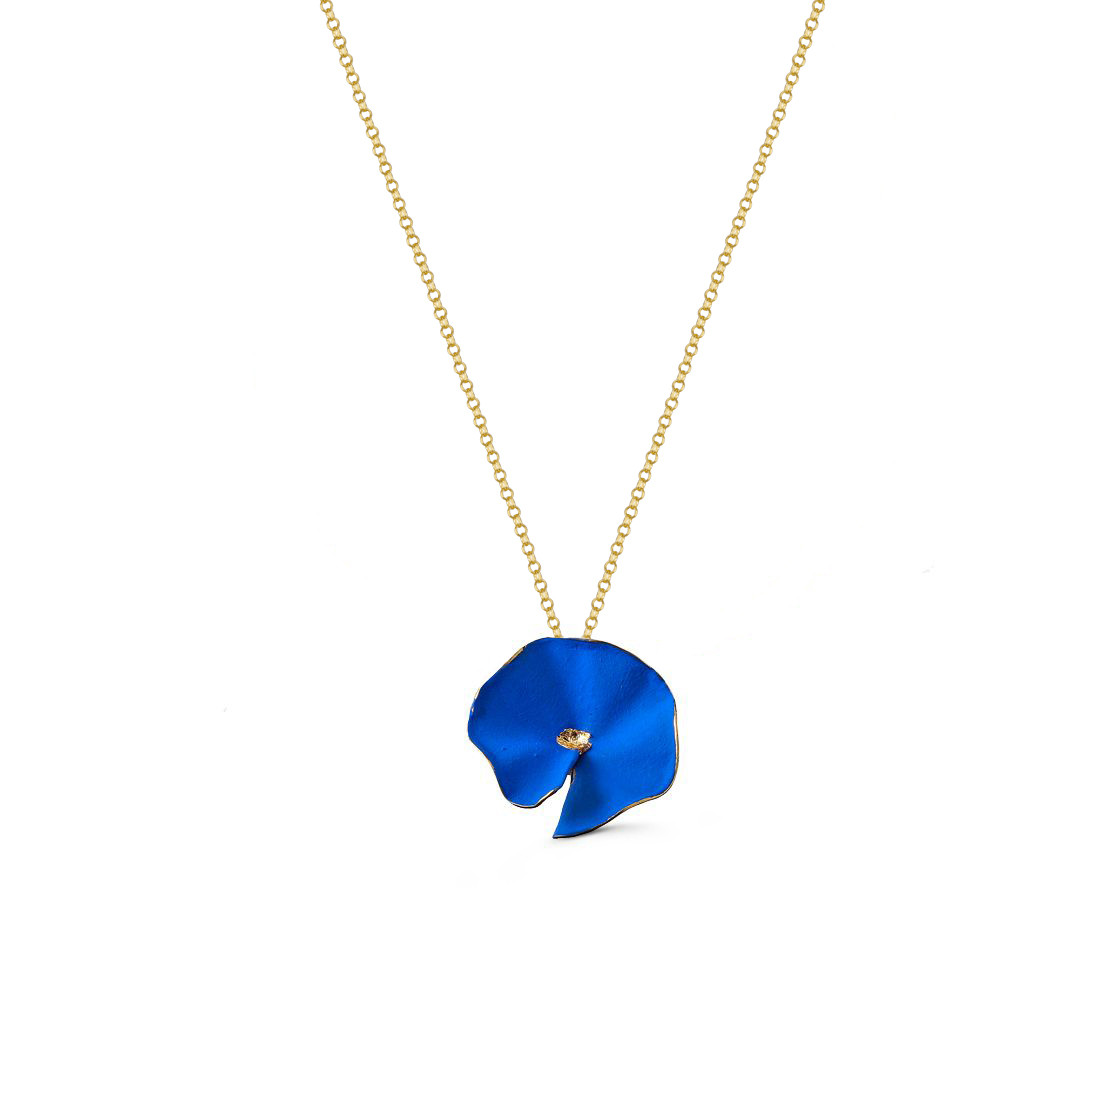 Royal blue flower with gold wire center on delicate gold necklace. Handpainted with natural pigments, with a velvet finish.